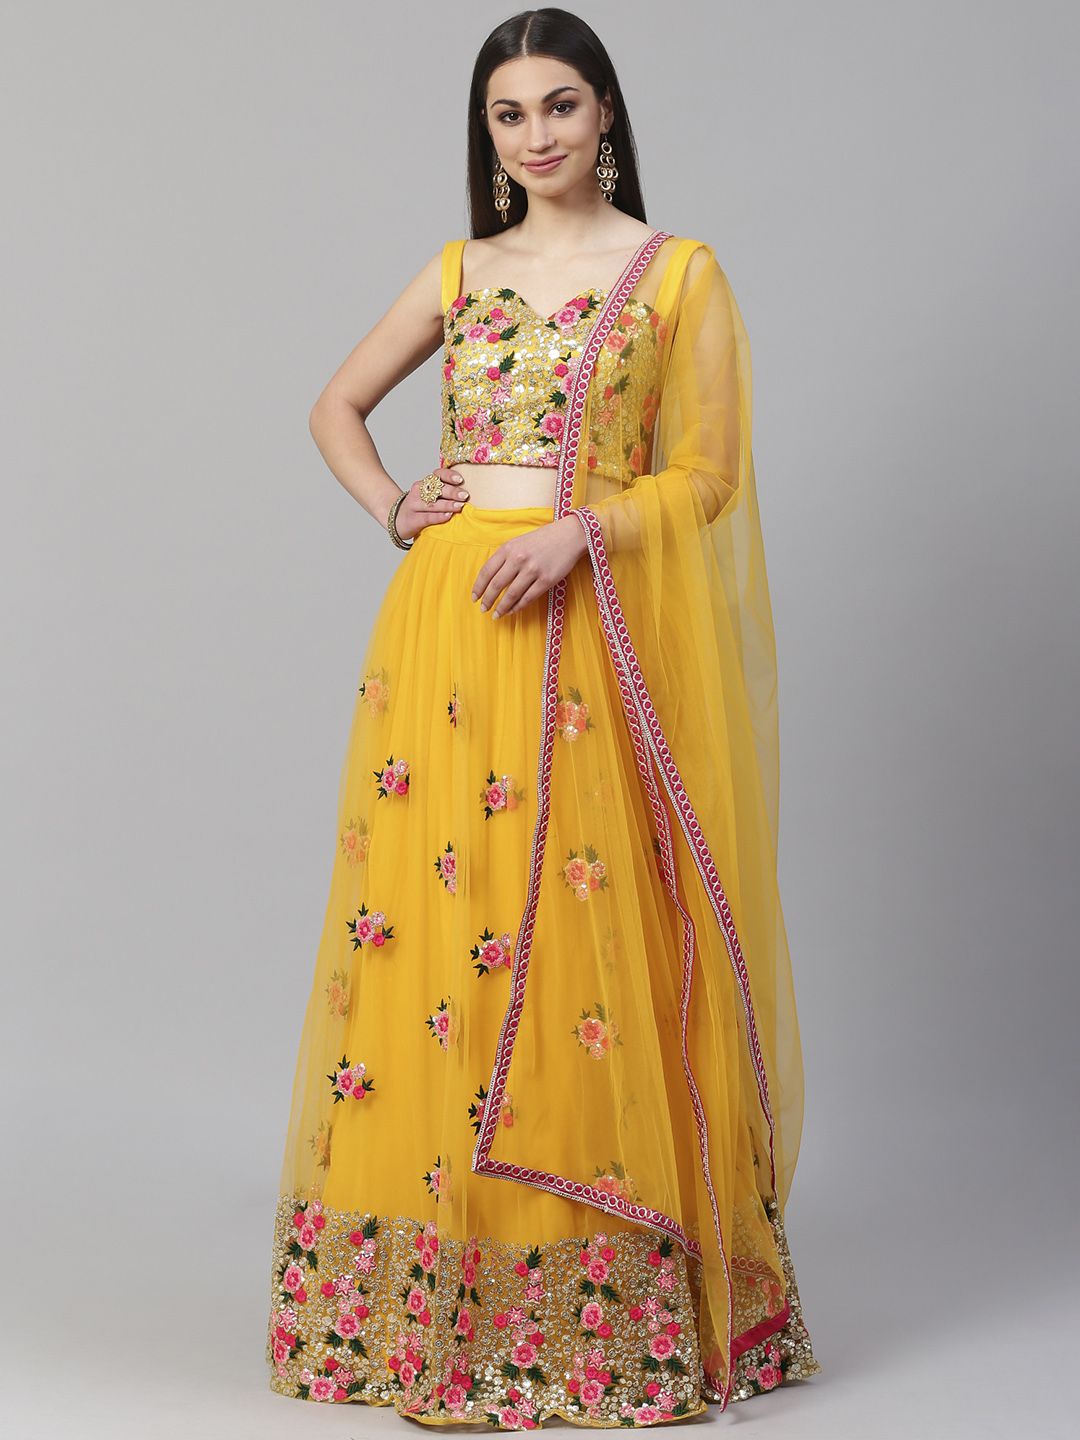 Readiprint Fashions Yellow & Pink Embroidered Semi-Stitched Lehenga & Unstitched Blouse with Dupatta Price in India